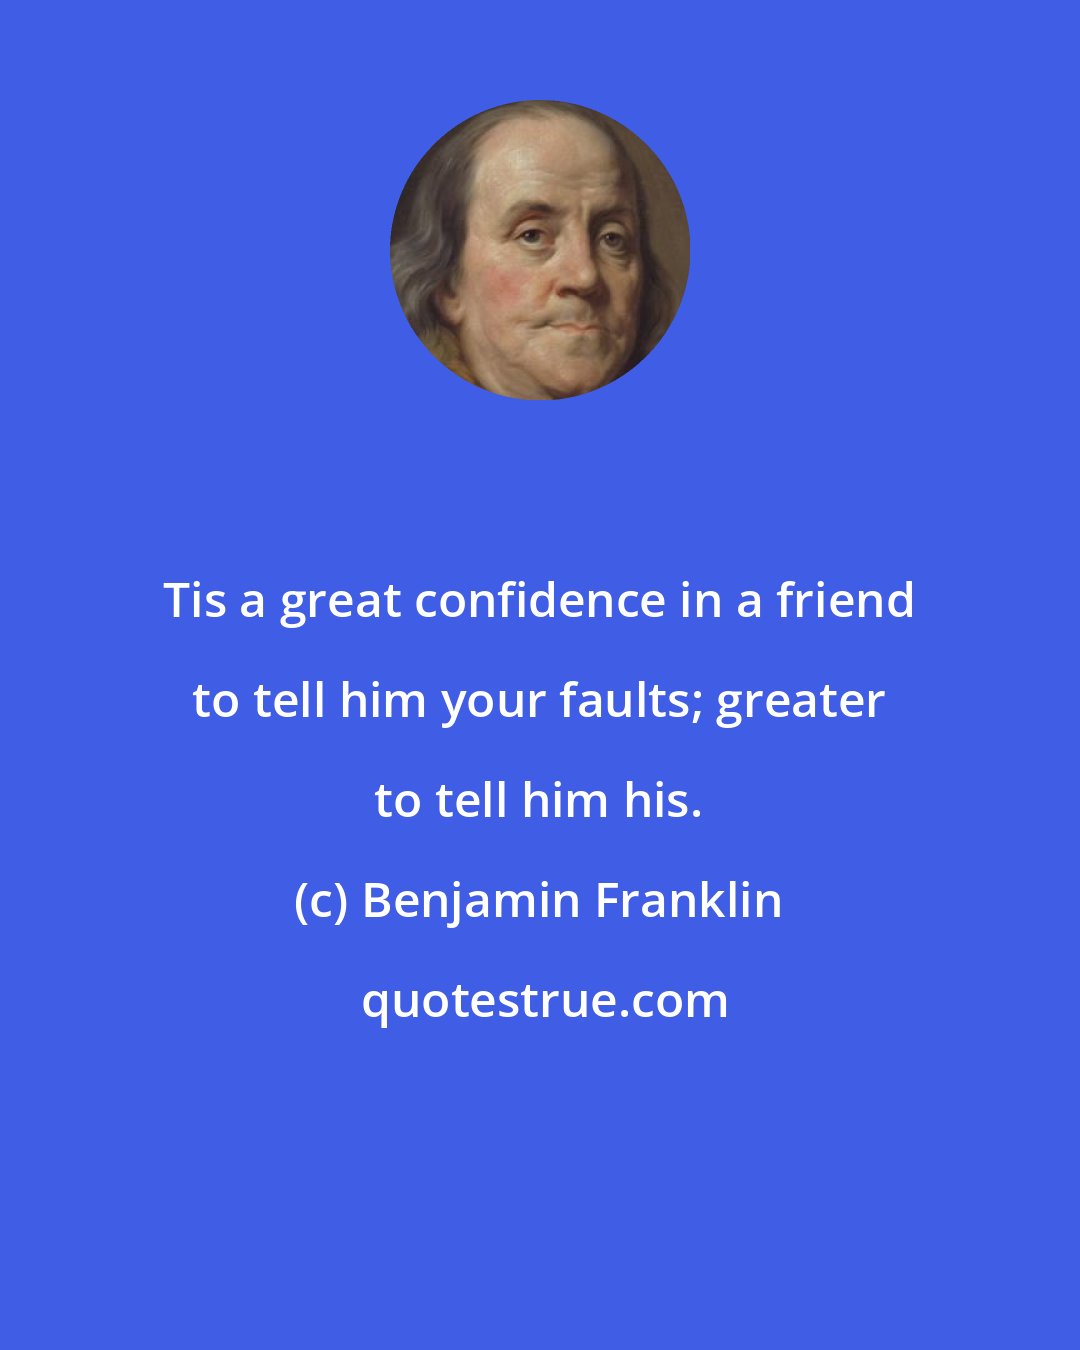 Benjamin Franklin: Tis a great confidence in a friend to tell him your faults; greater to tell him his.